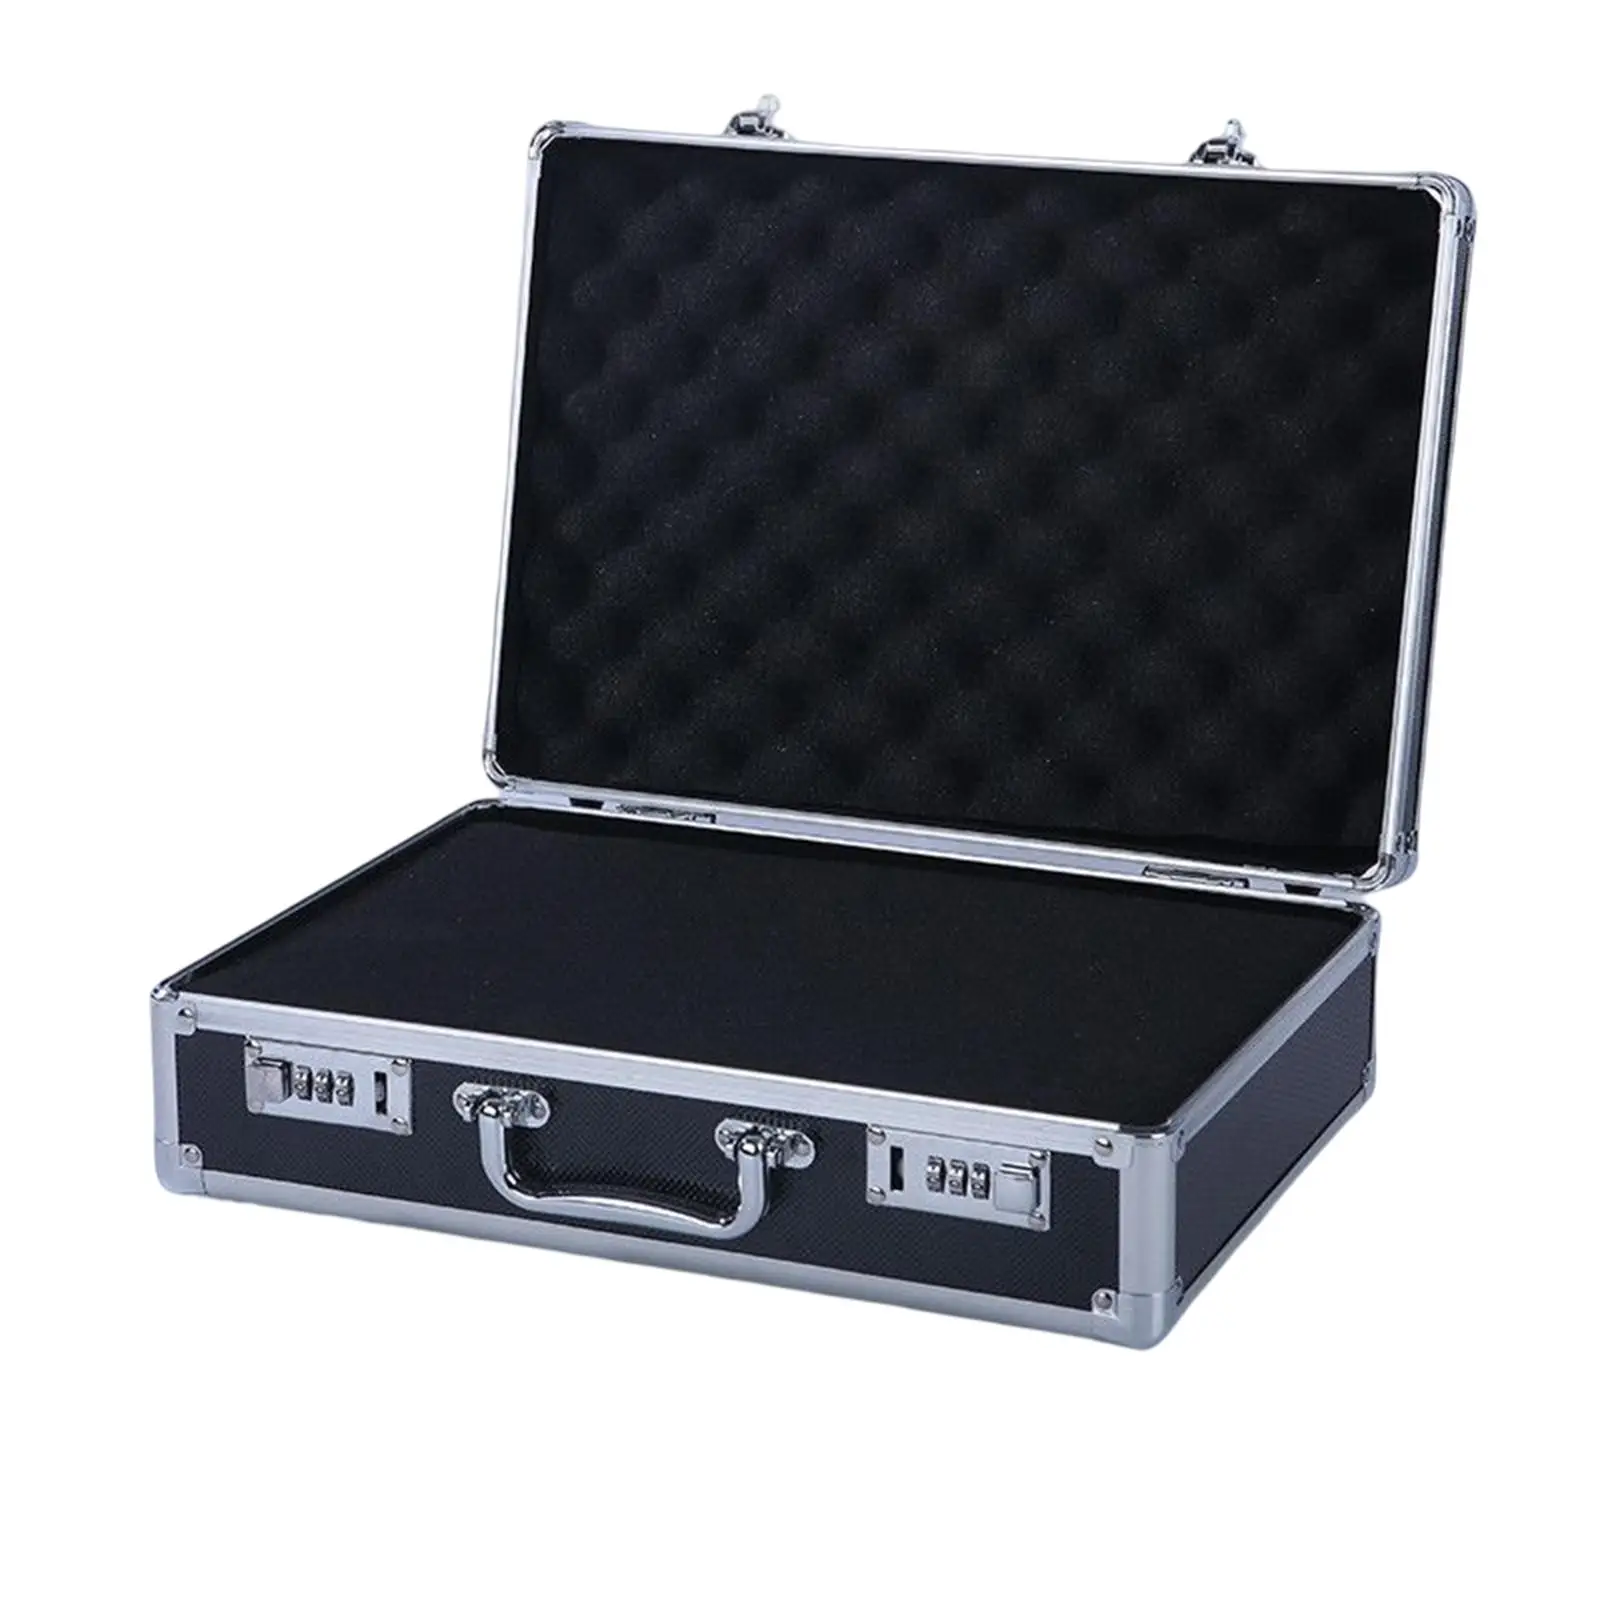 Briefcase File Storage Box Safety Equipment Hardware Lightweight Display Case Waterproof Carrying Case